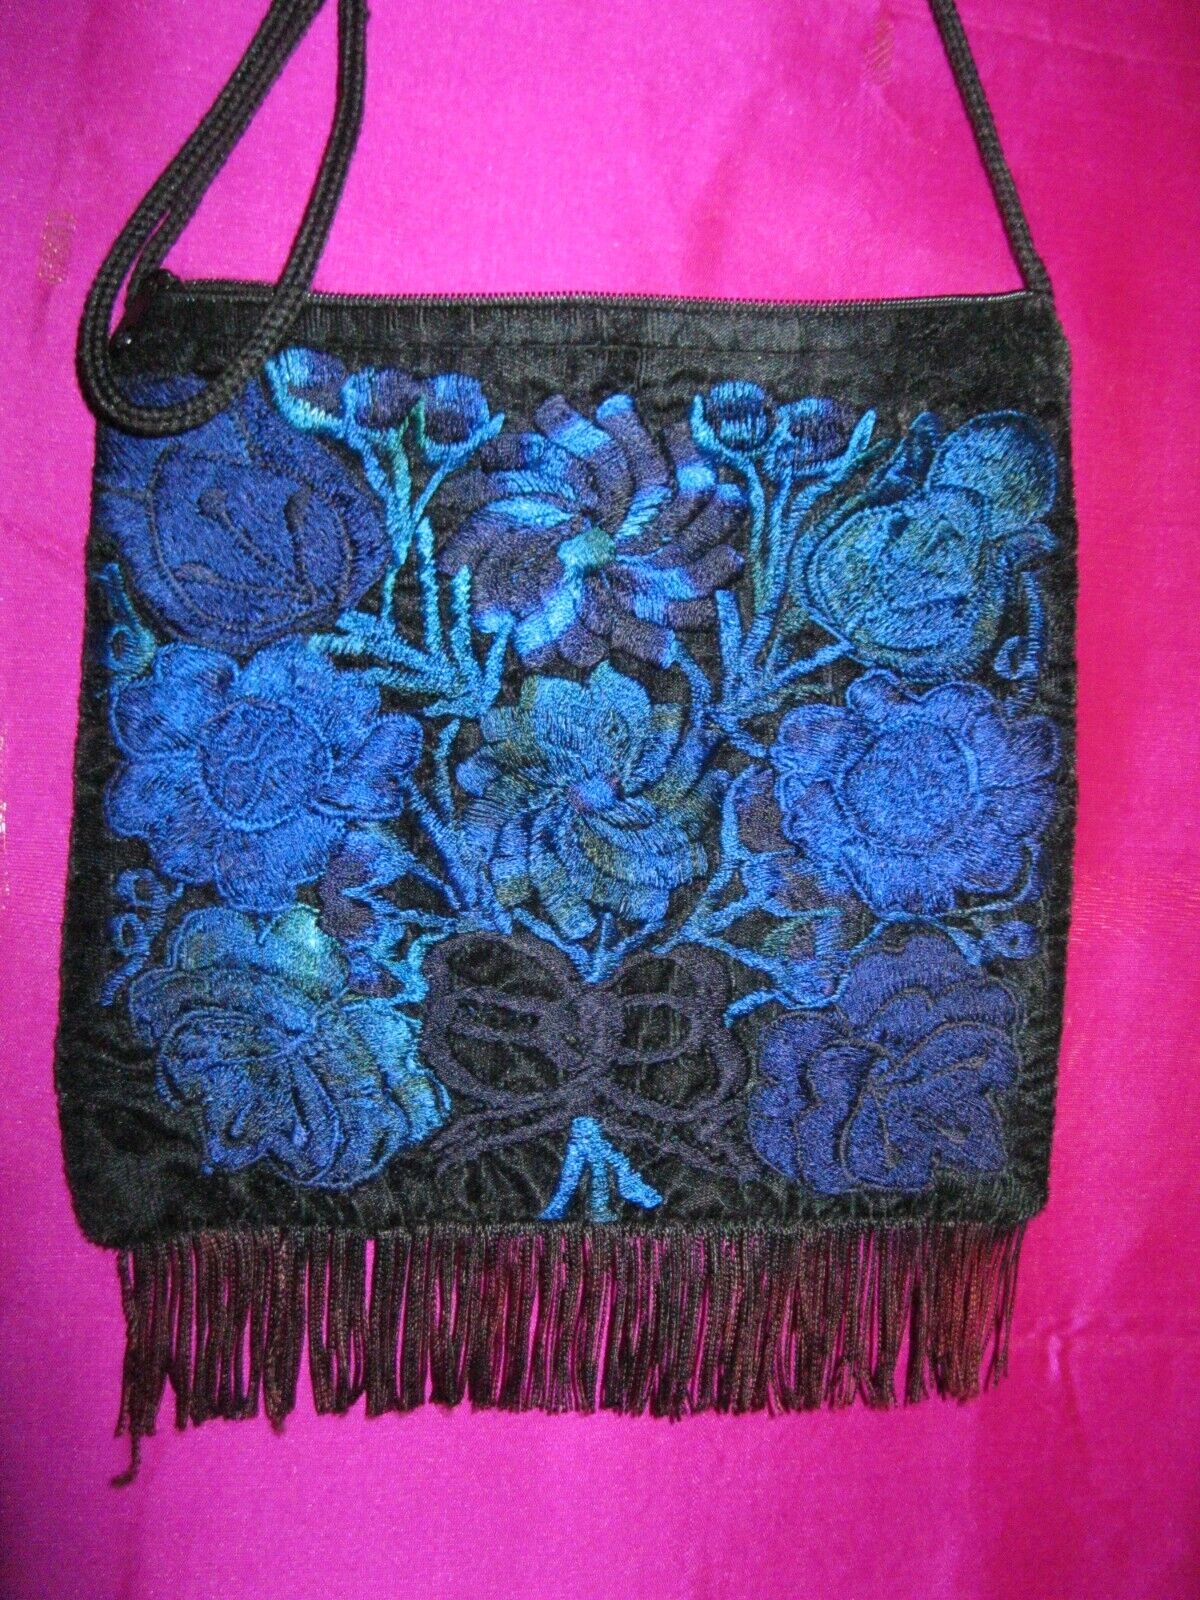 Guatemalan Bag, Black Velvet With Blue Embroidered Flowers On Front, Zipper